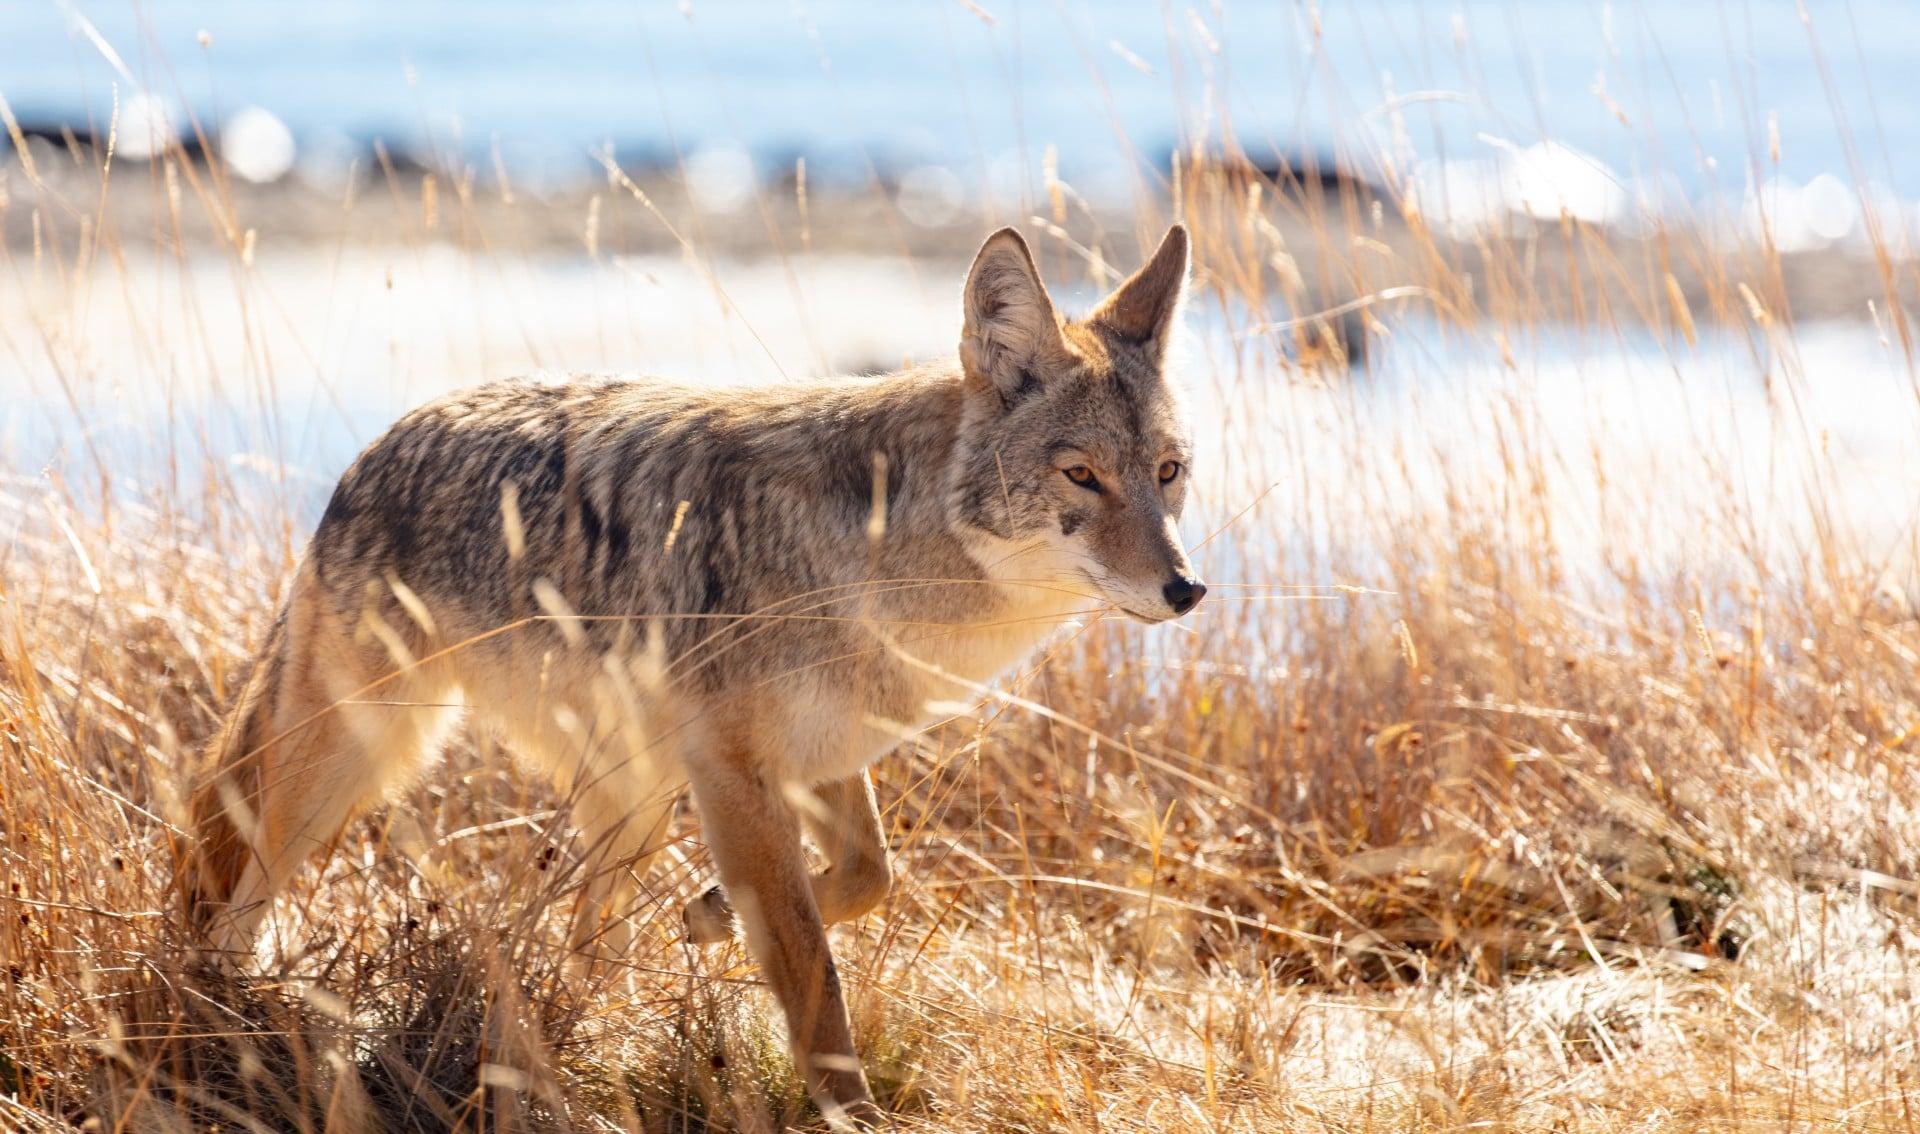 Fast-moving varmints like coyotes can be a challenge to track when shooting off a rest